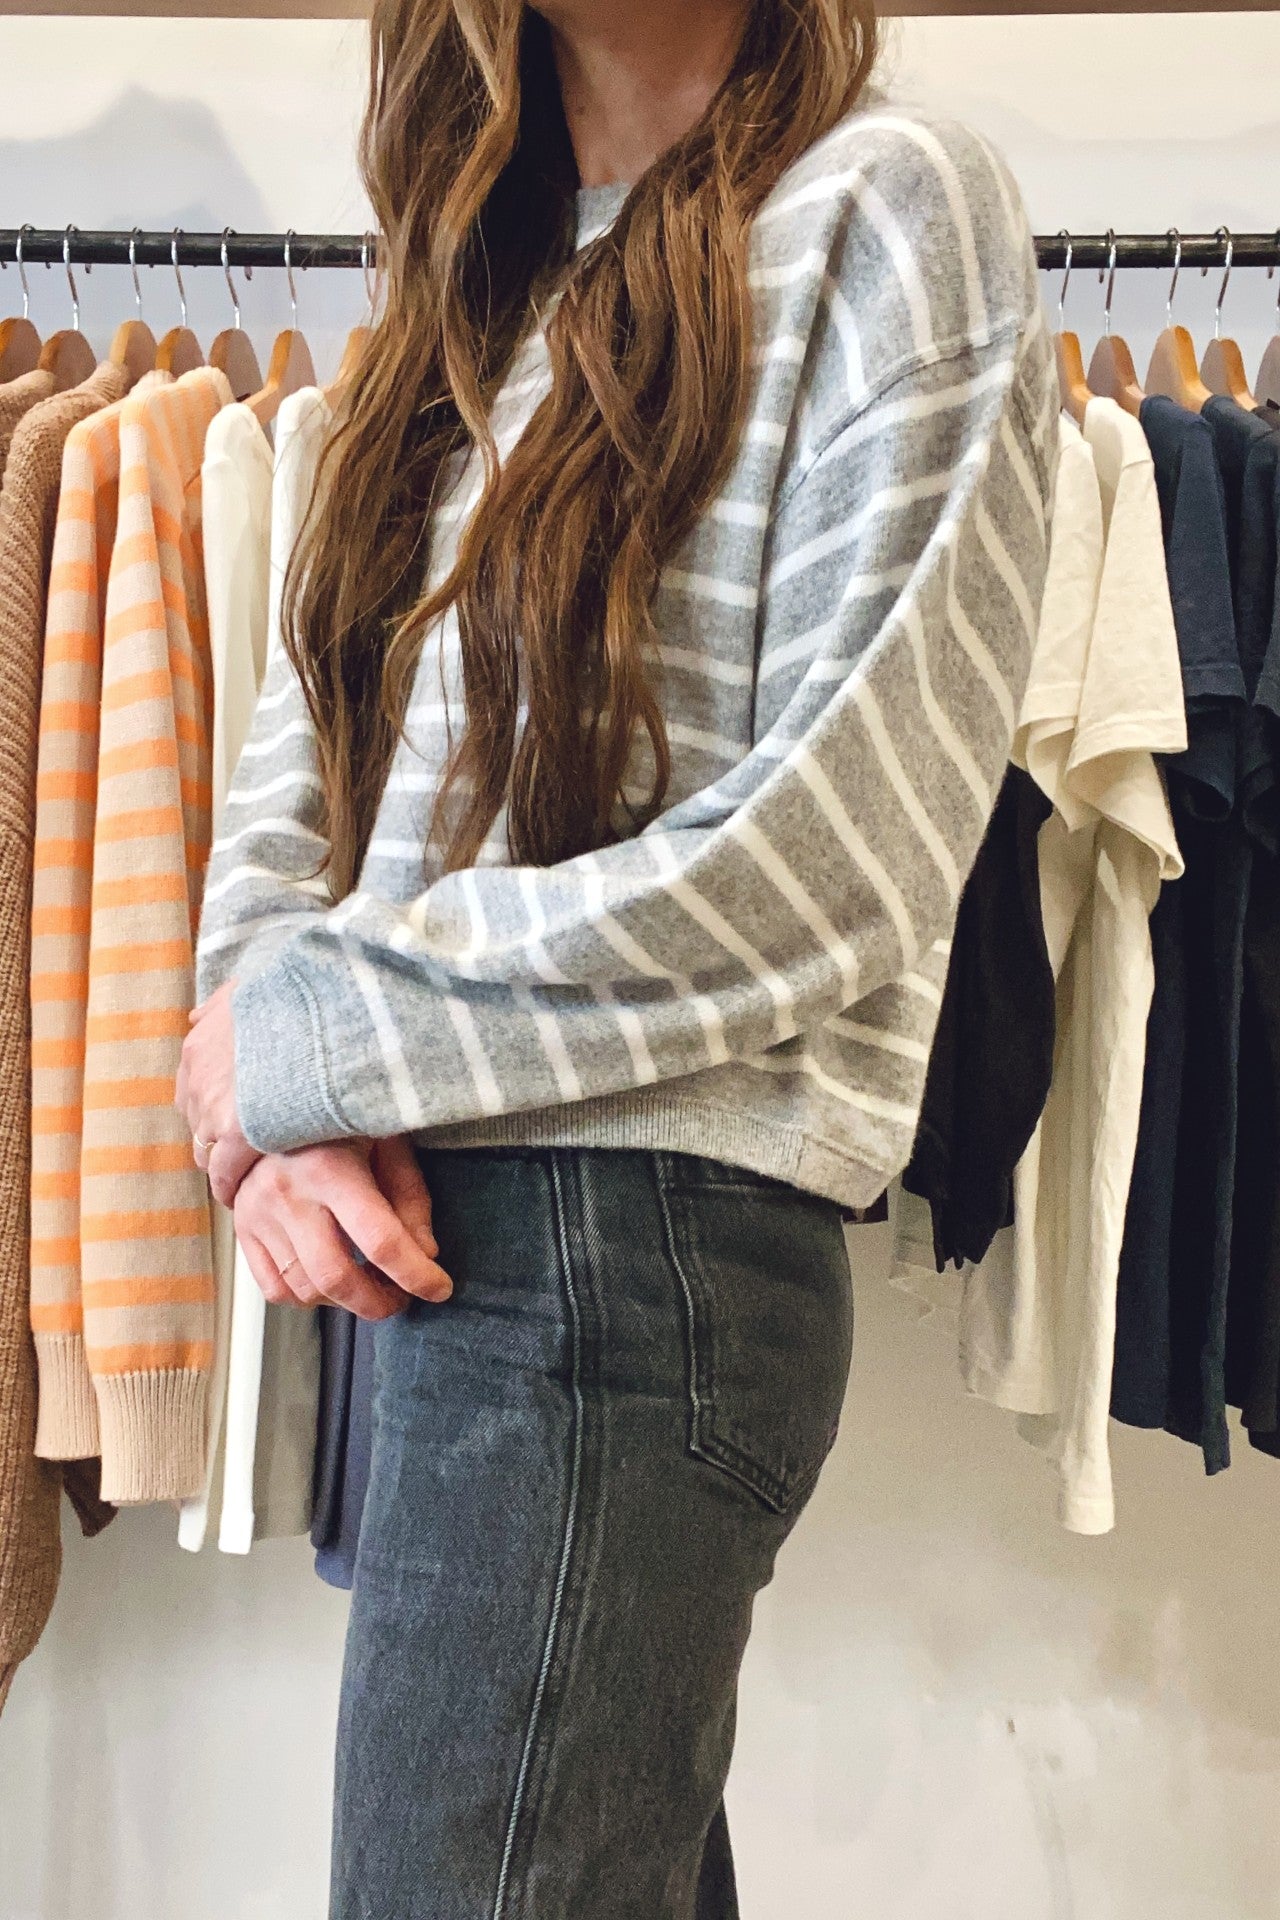 WHITE + WARREN _ Spring Weight Cashmere Drop Shoulder Sweatshirt _ Cropped Length with Heather Grey and Ivory White Stripes